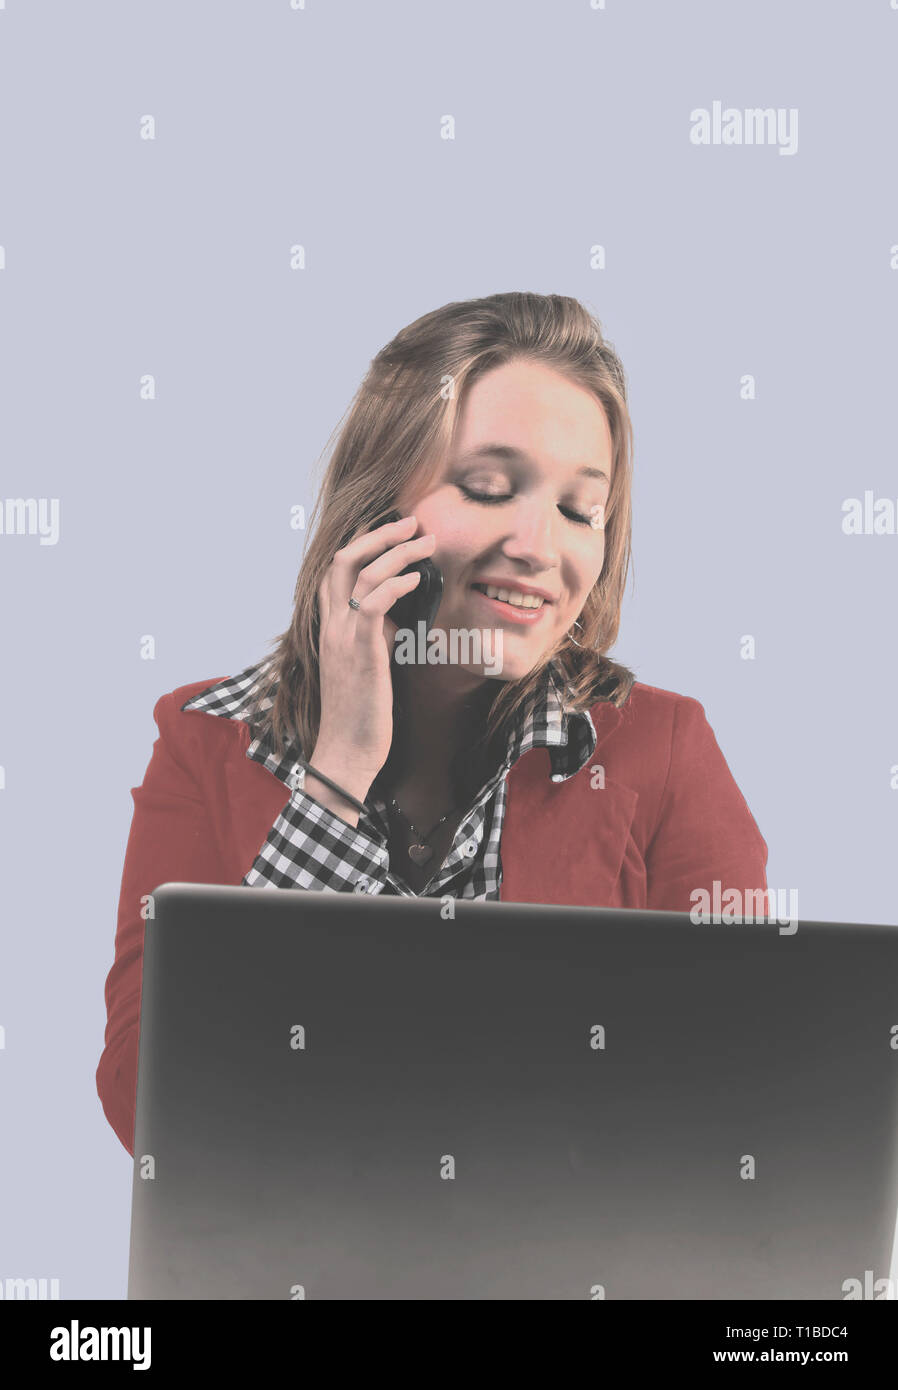 Young woman with red jacket answering phone while looking at laptop Stock Photo